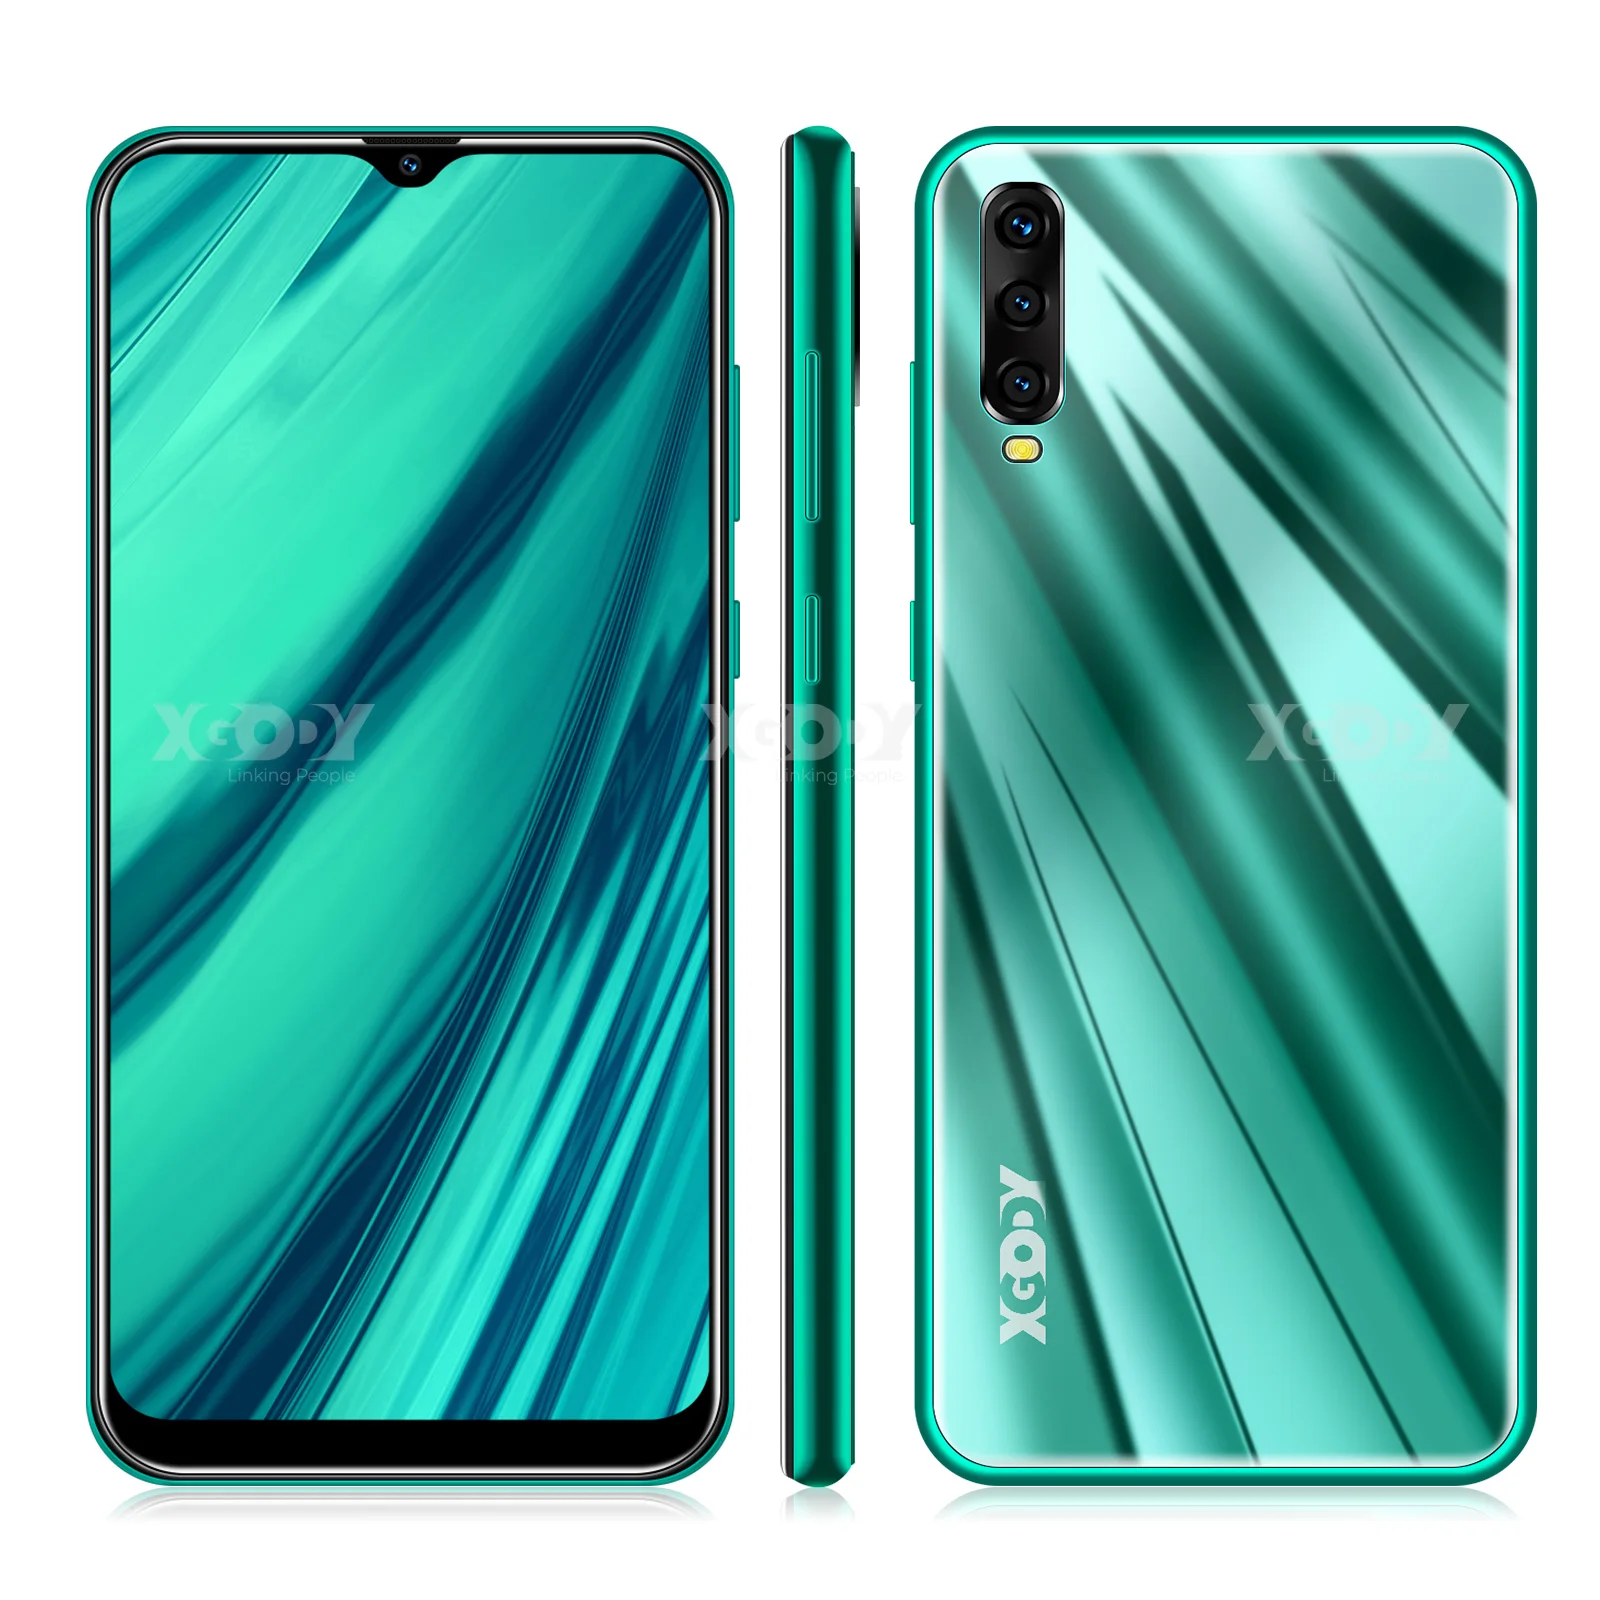 XGODY A90 3G Smartphone 6.53" Waterdrop Screen Android 9.0 Mobile Phone 2GB 16GB MTK6580 Quad Core 5MP Camera 3000mAh Cellphone